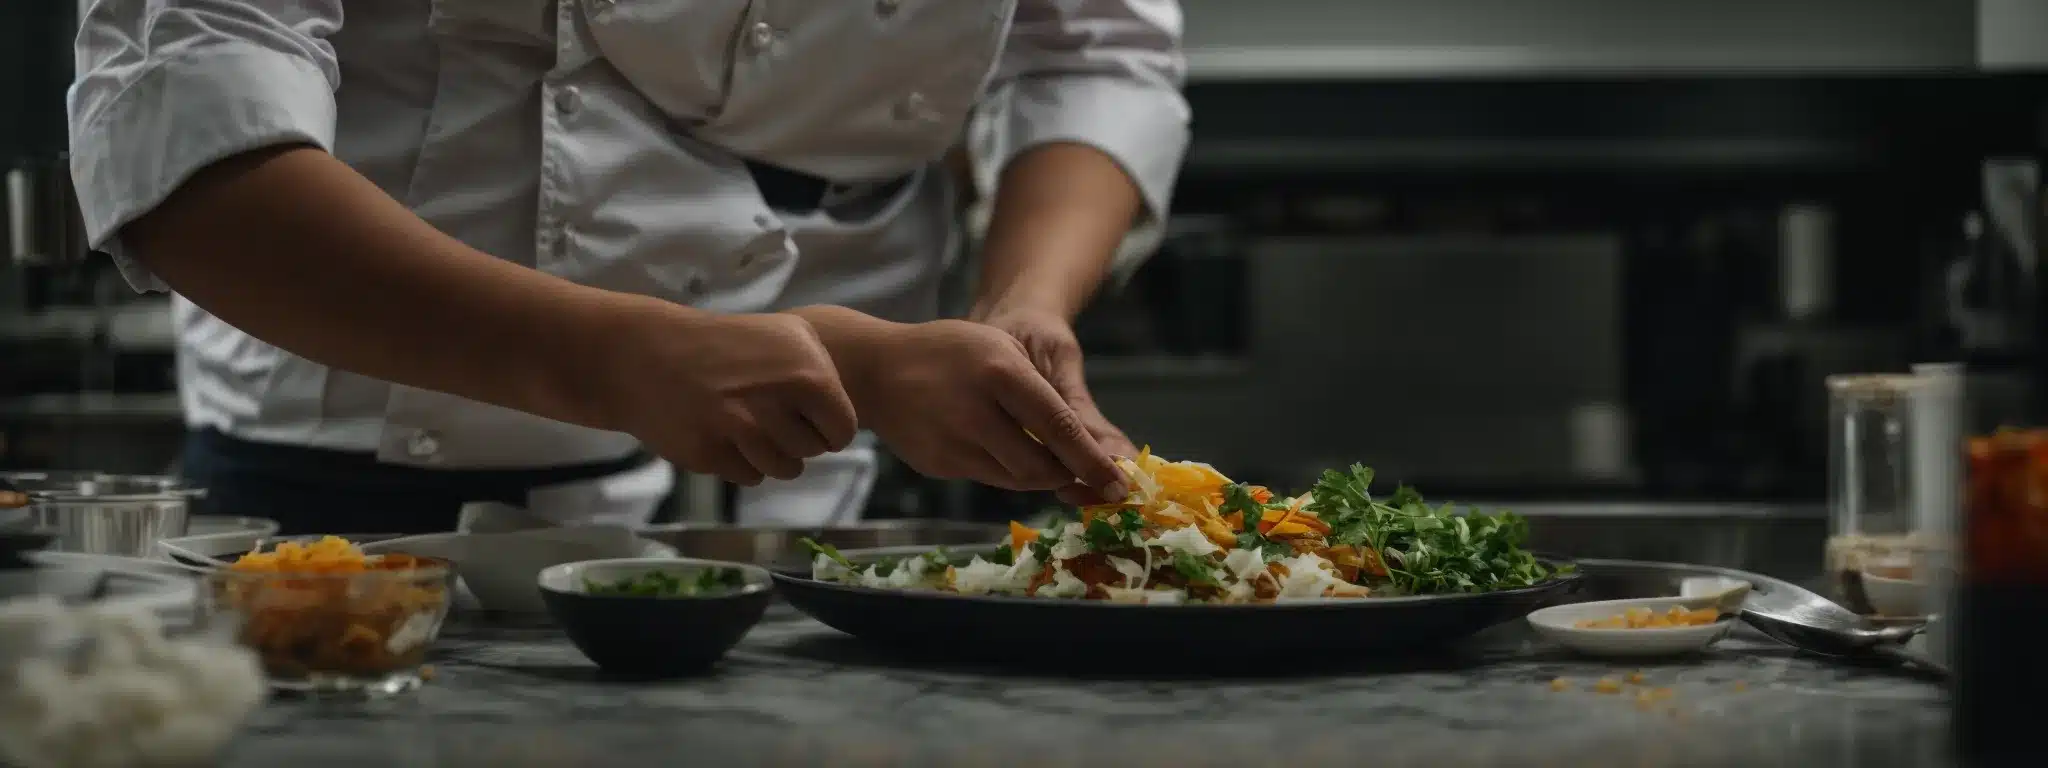 A Chef Carefully Garnishing A Gourmet Dish In A Professional Kitchen Setup.